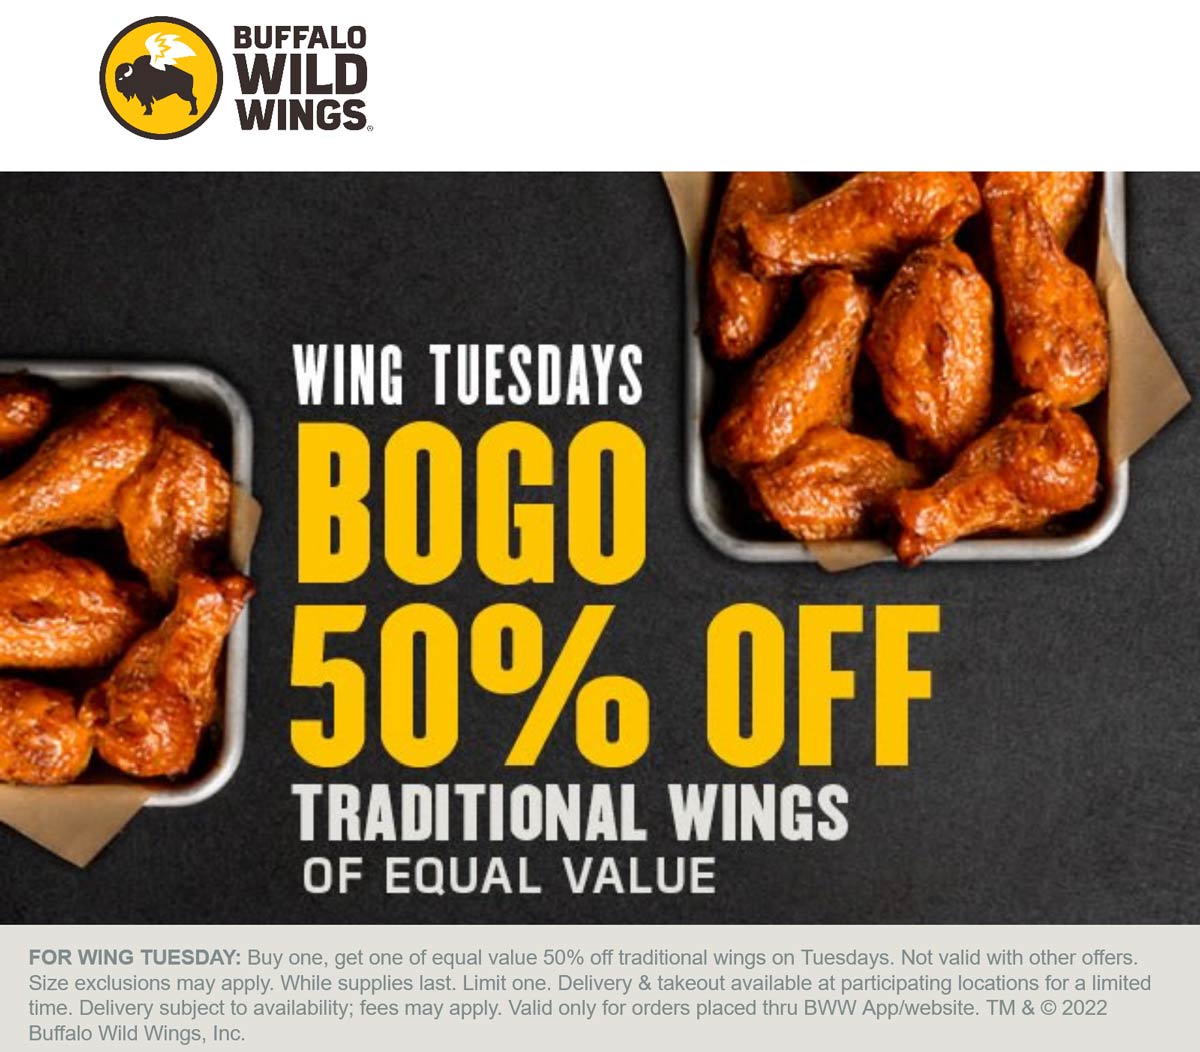 Buffalo Wild Wings restaurants Coupon  Second traditional chicken wings 50% off today at Buffalo Wild Wings #buffalowildwings 